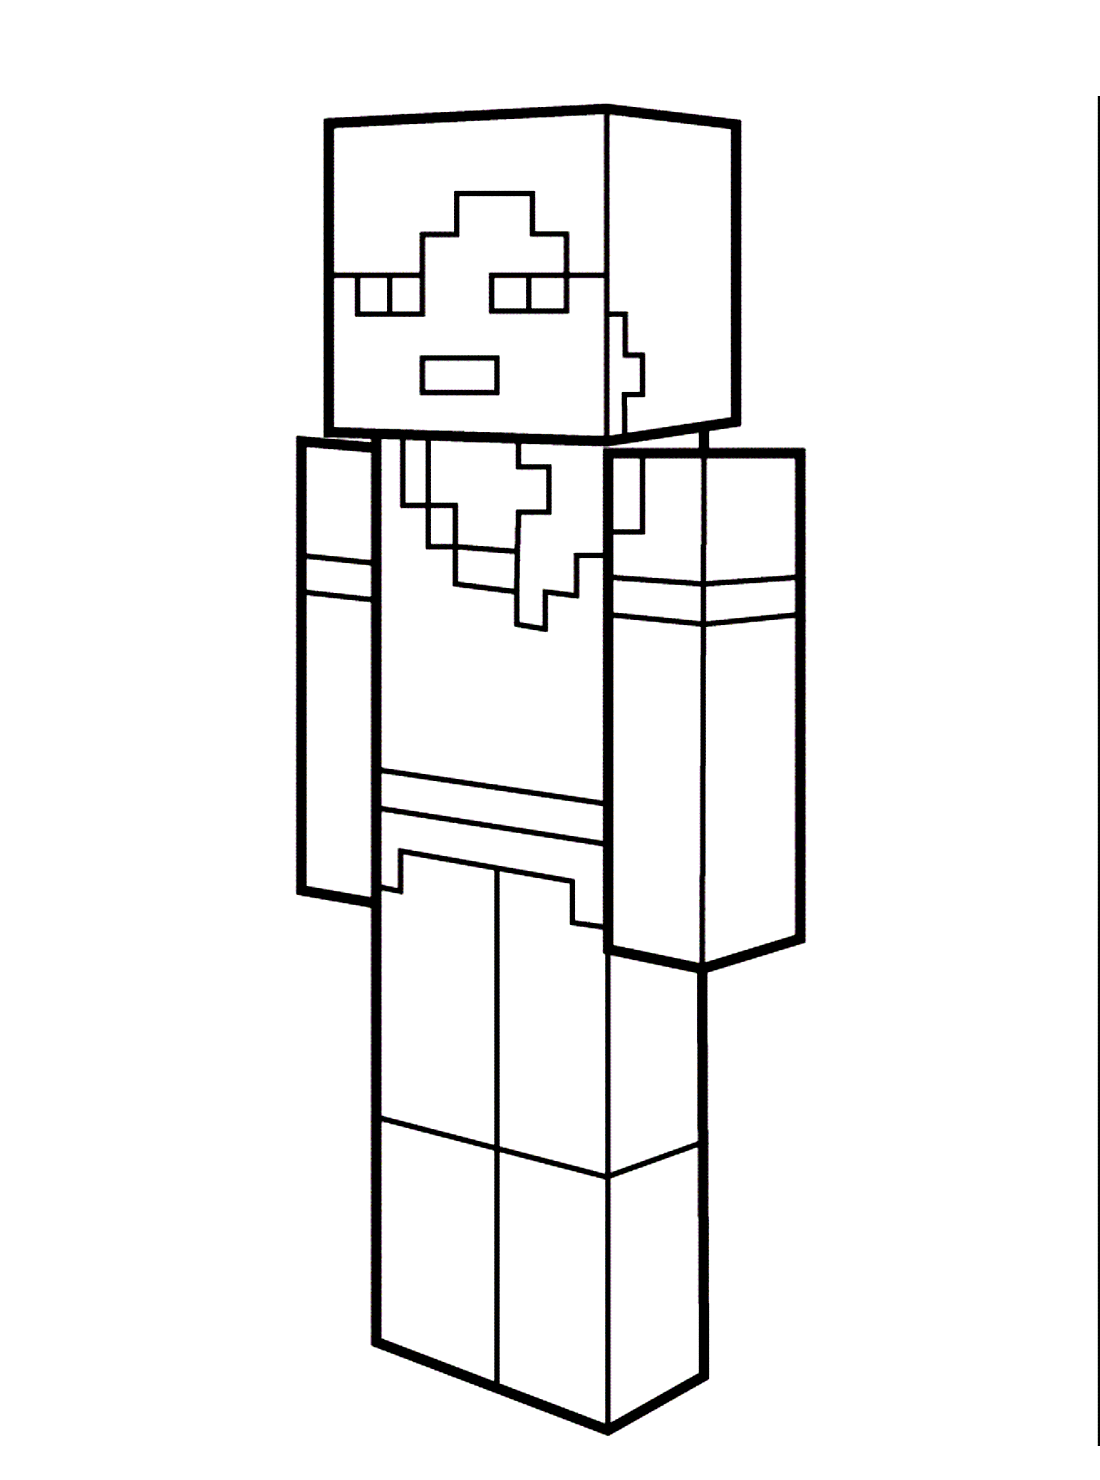 Minecraft printable coloring pages k worksheets minecraft coloring pages minecraft printables minecraft stampy